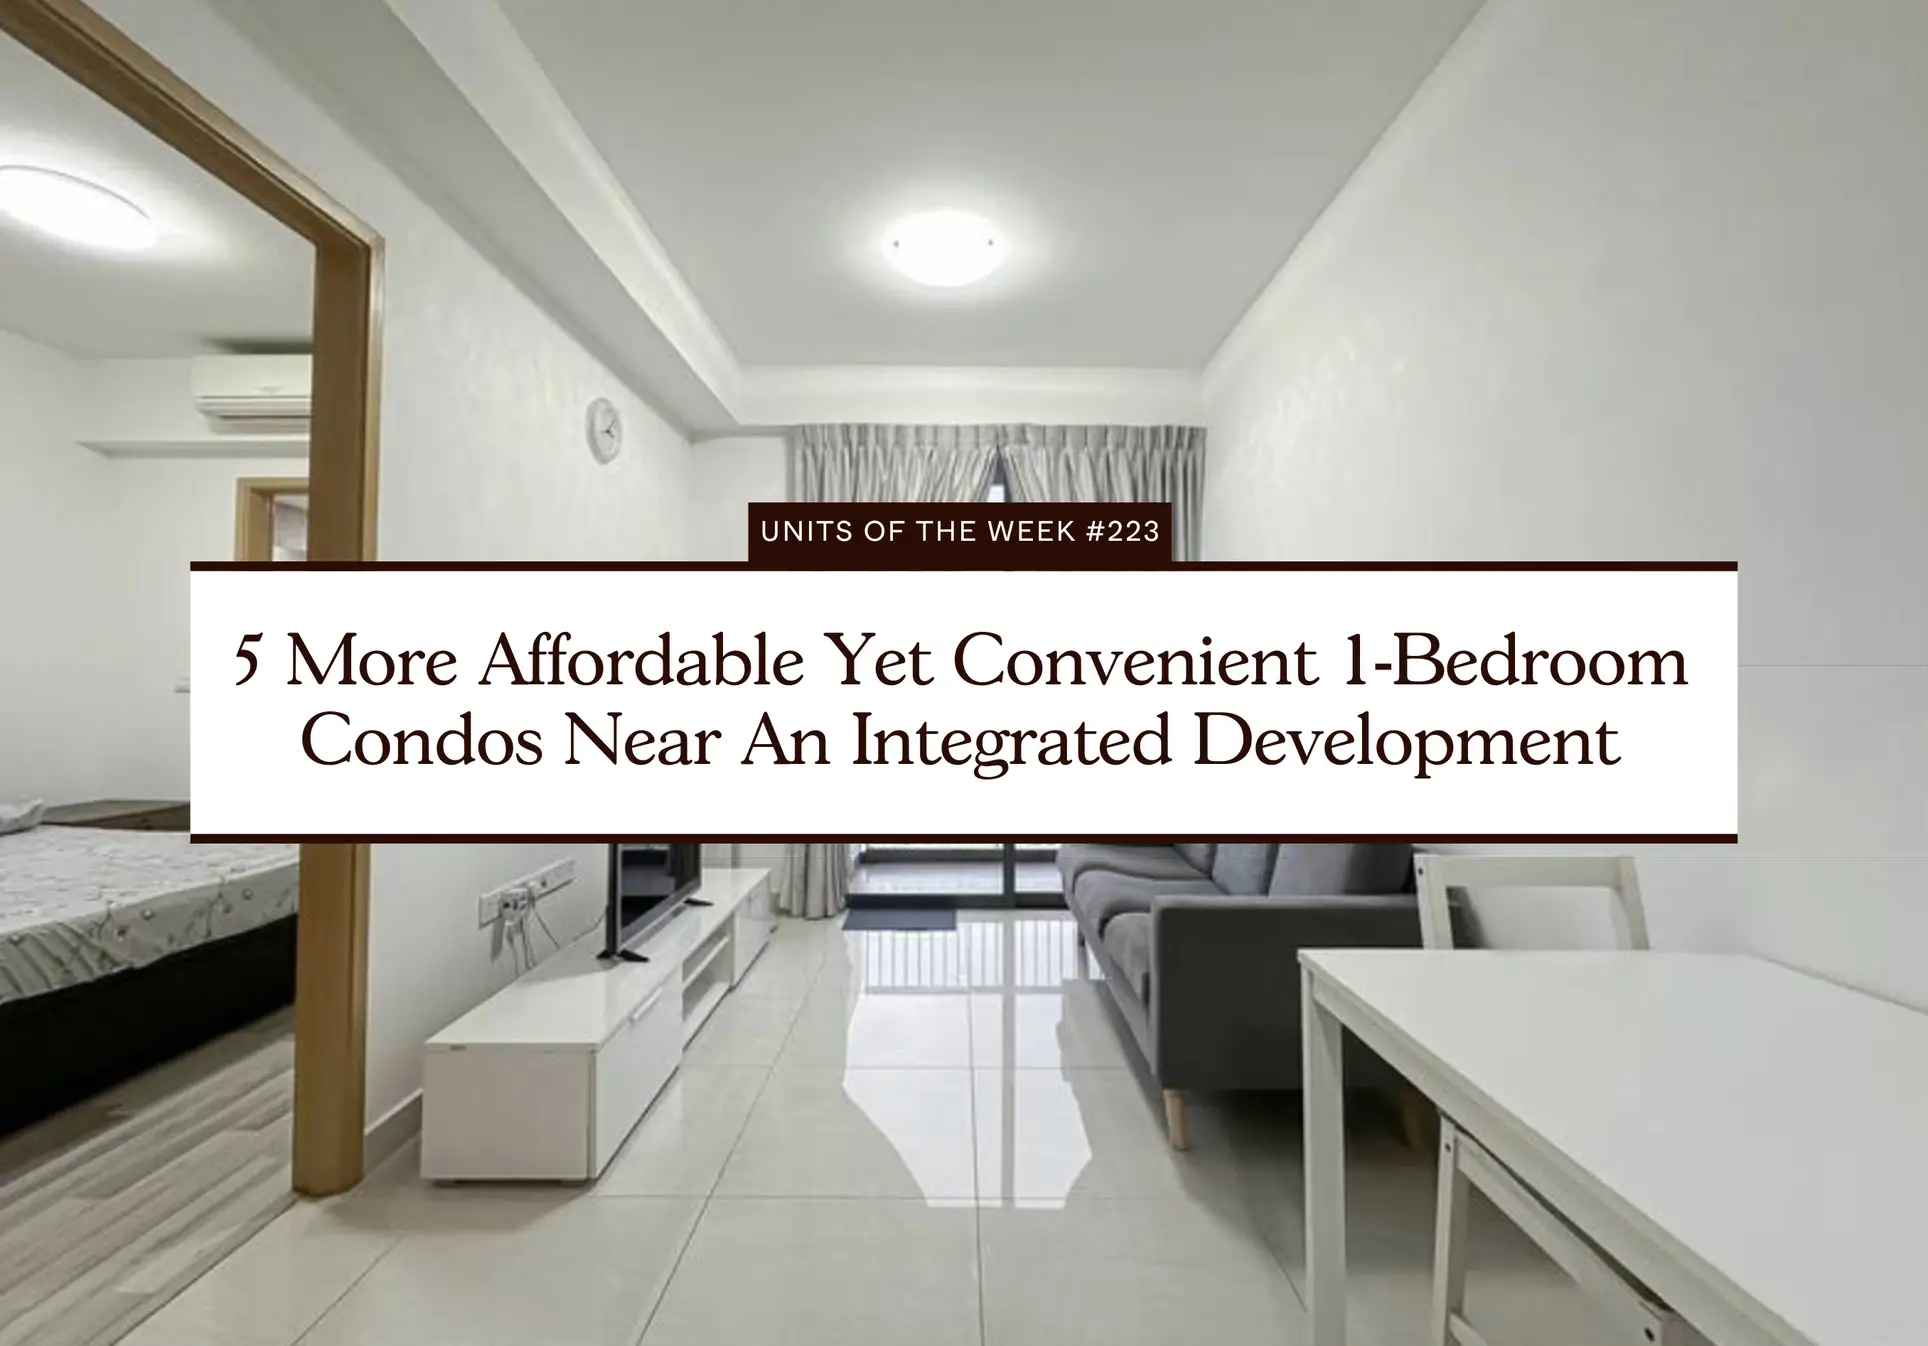 5 More Affordable Yet Convenient 1 Bedroom Condos Near An Integrated Development